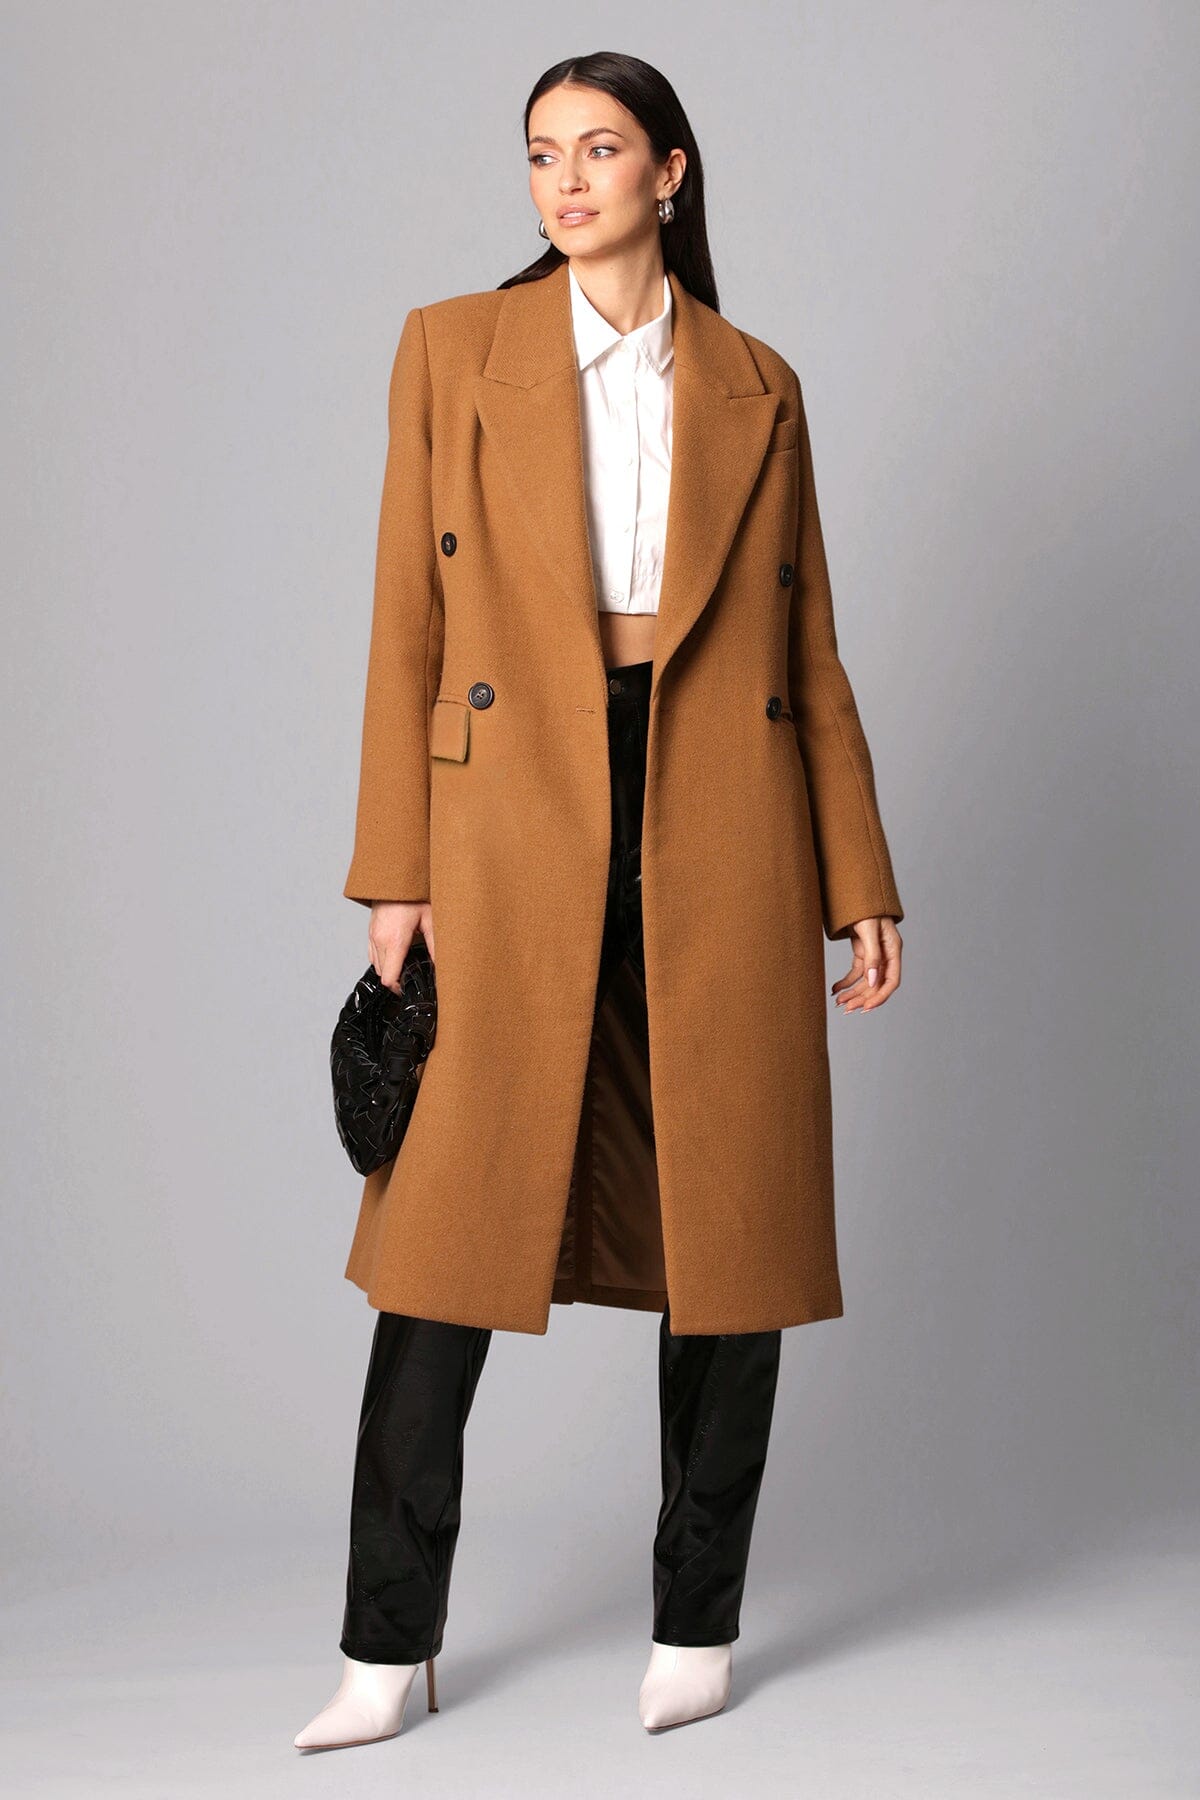 Toffee brown wool blend double breasted tailored coat jacket - women's figure flattering office to date night coats jackets